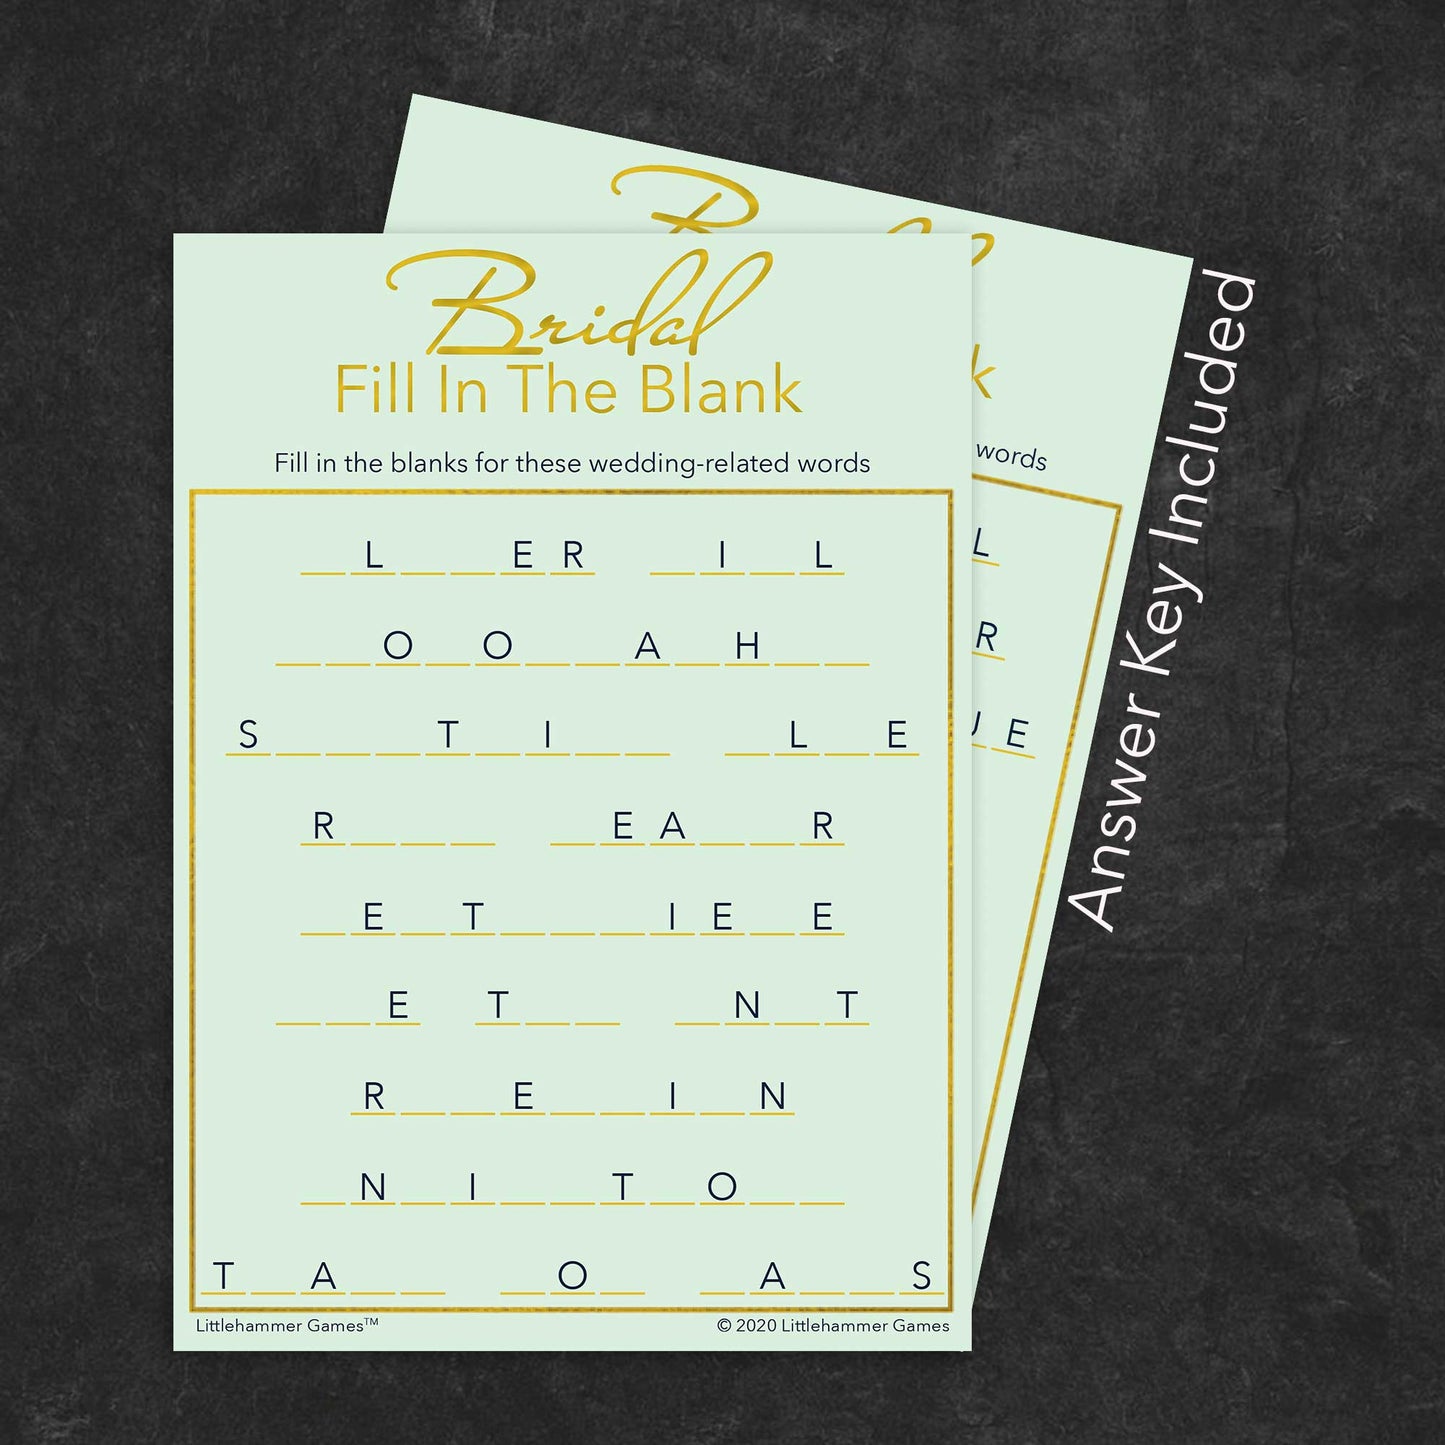 Bridal Fill in the Blank game card with a mint and gold background with answer card tucked behind it on a slate background with white text that says "Answer Key Included"